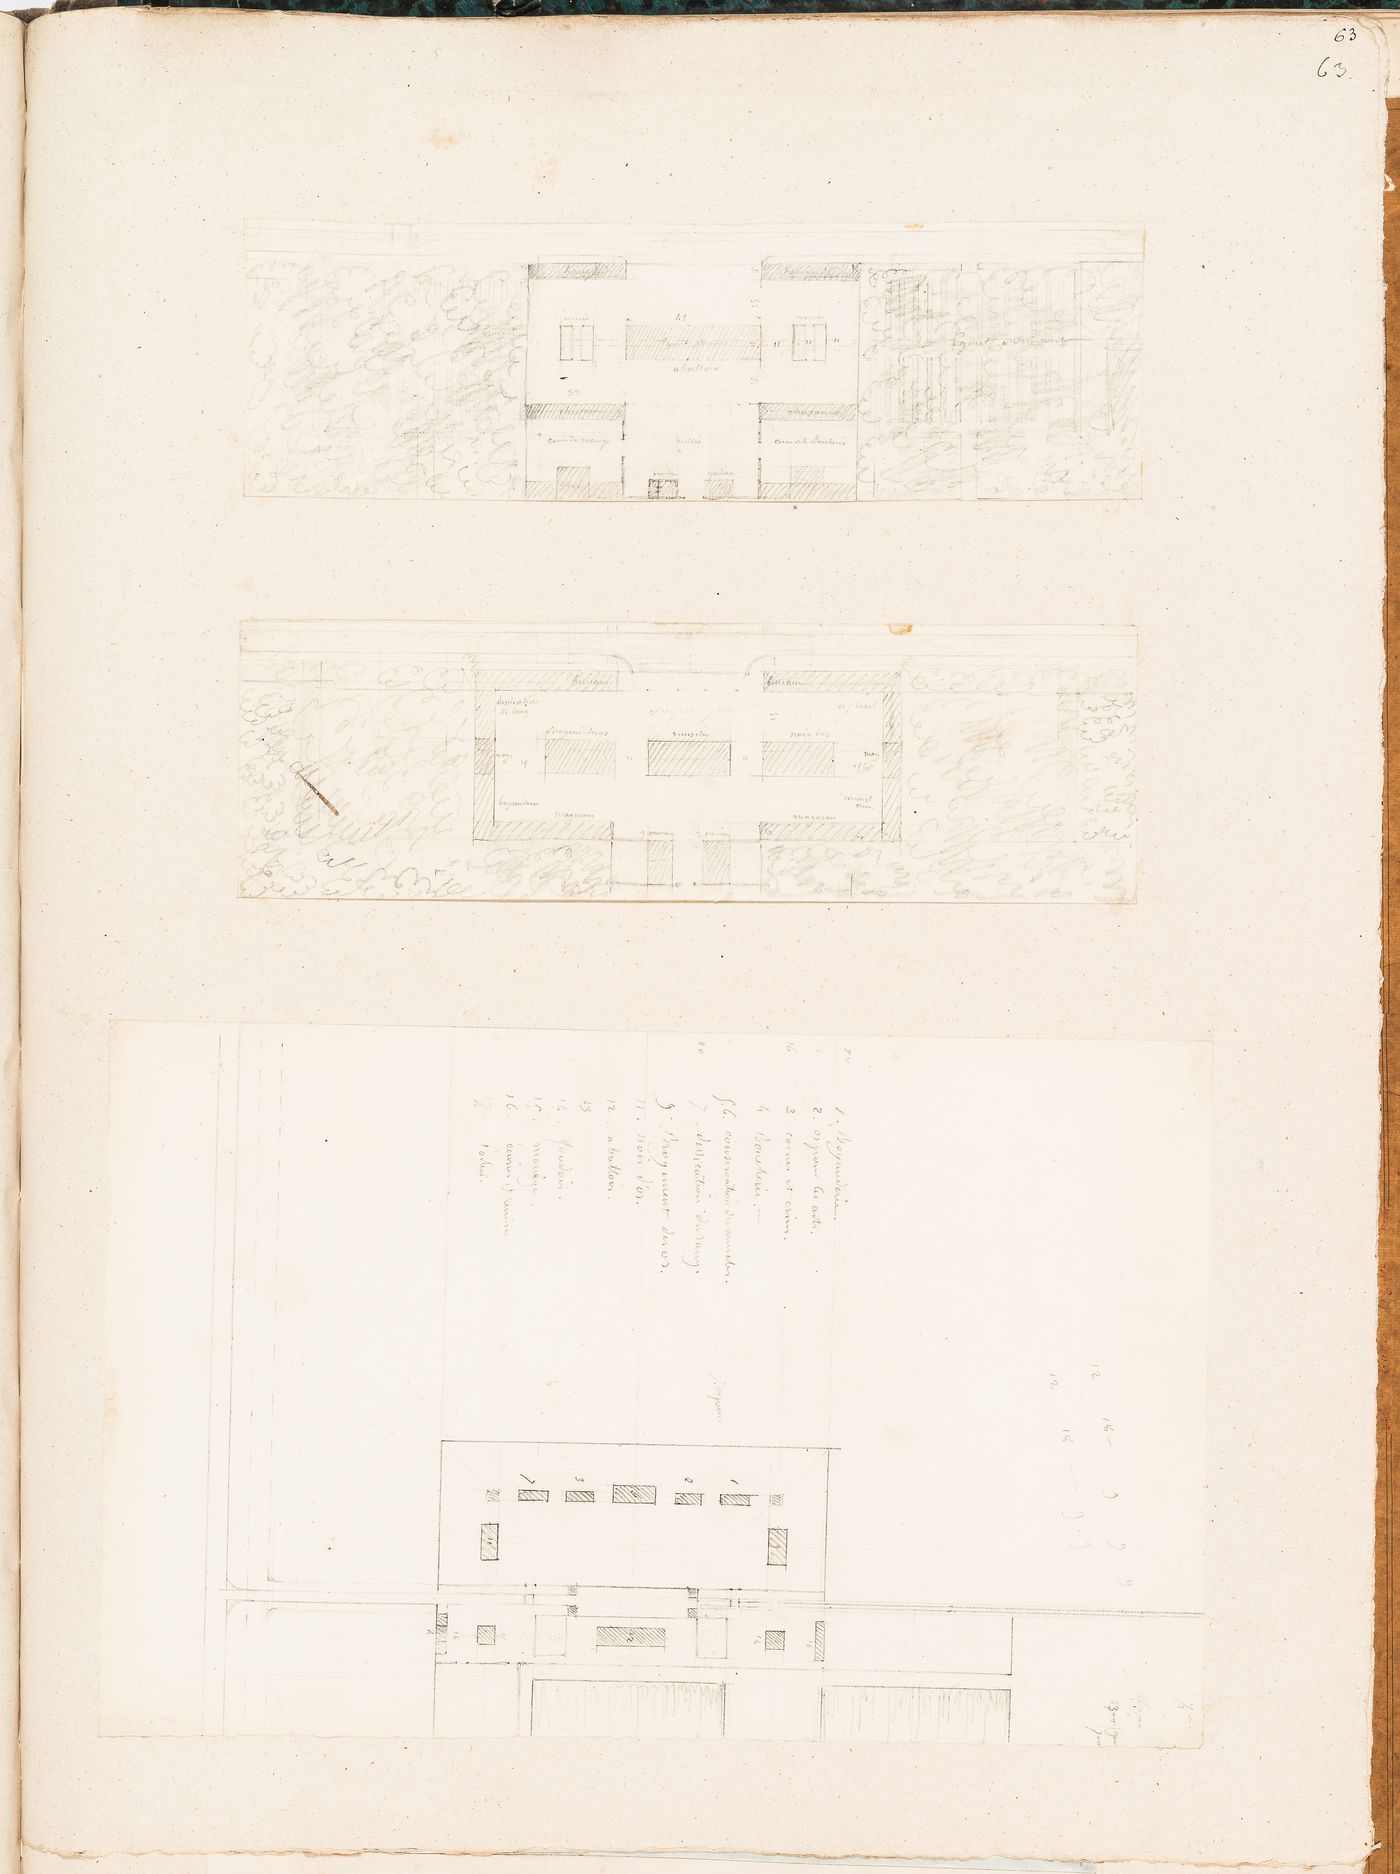 Project for Clos d'équarrissage, fôret de Bondy: Partial block plan with a numbered key identifying some of the buildings